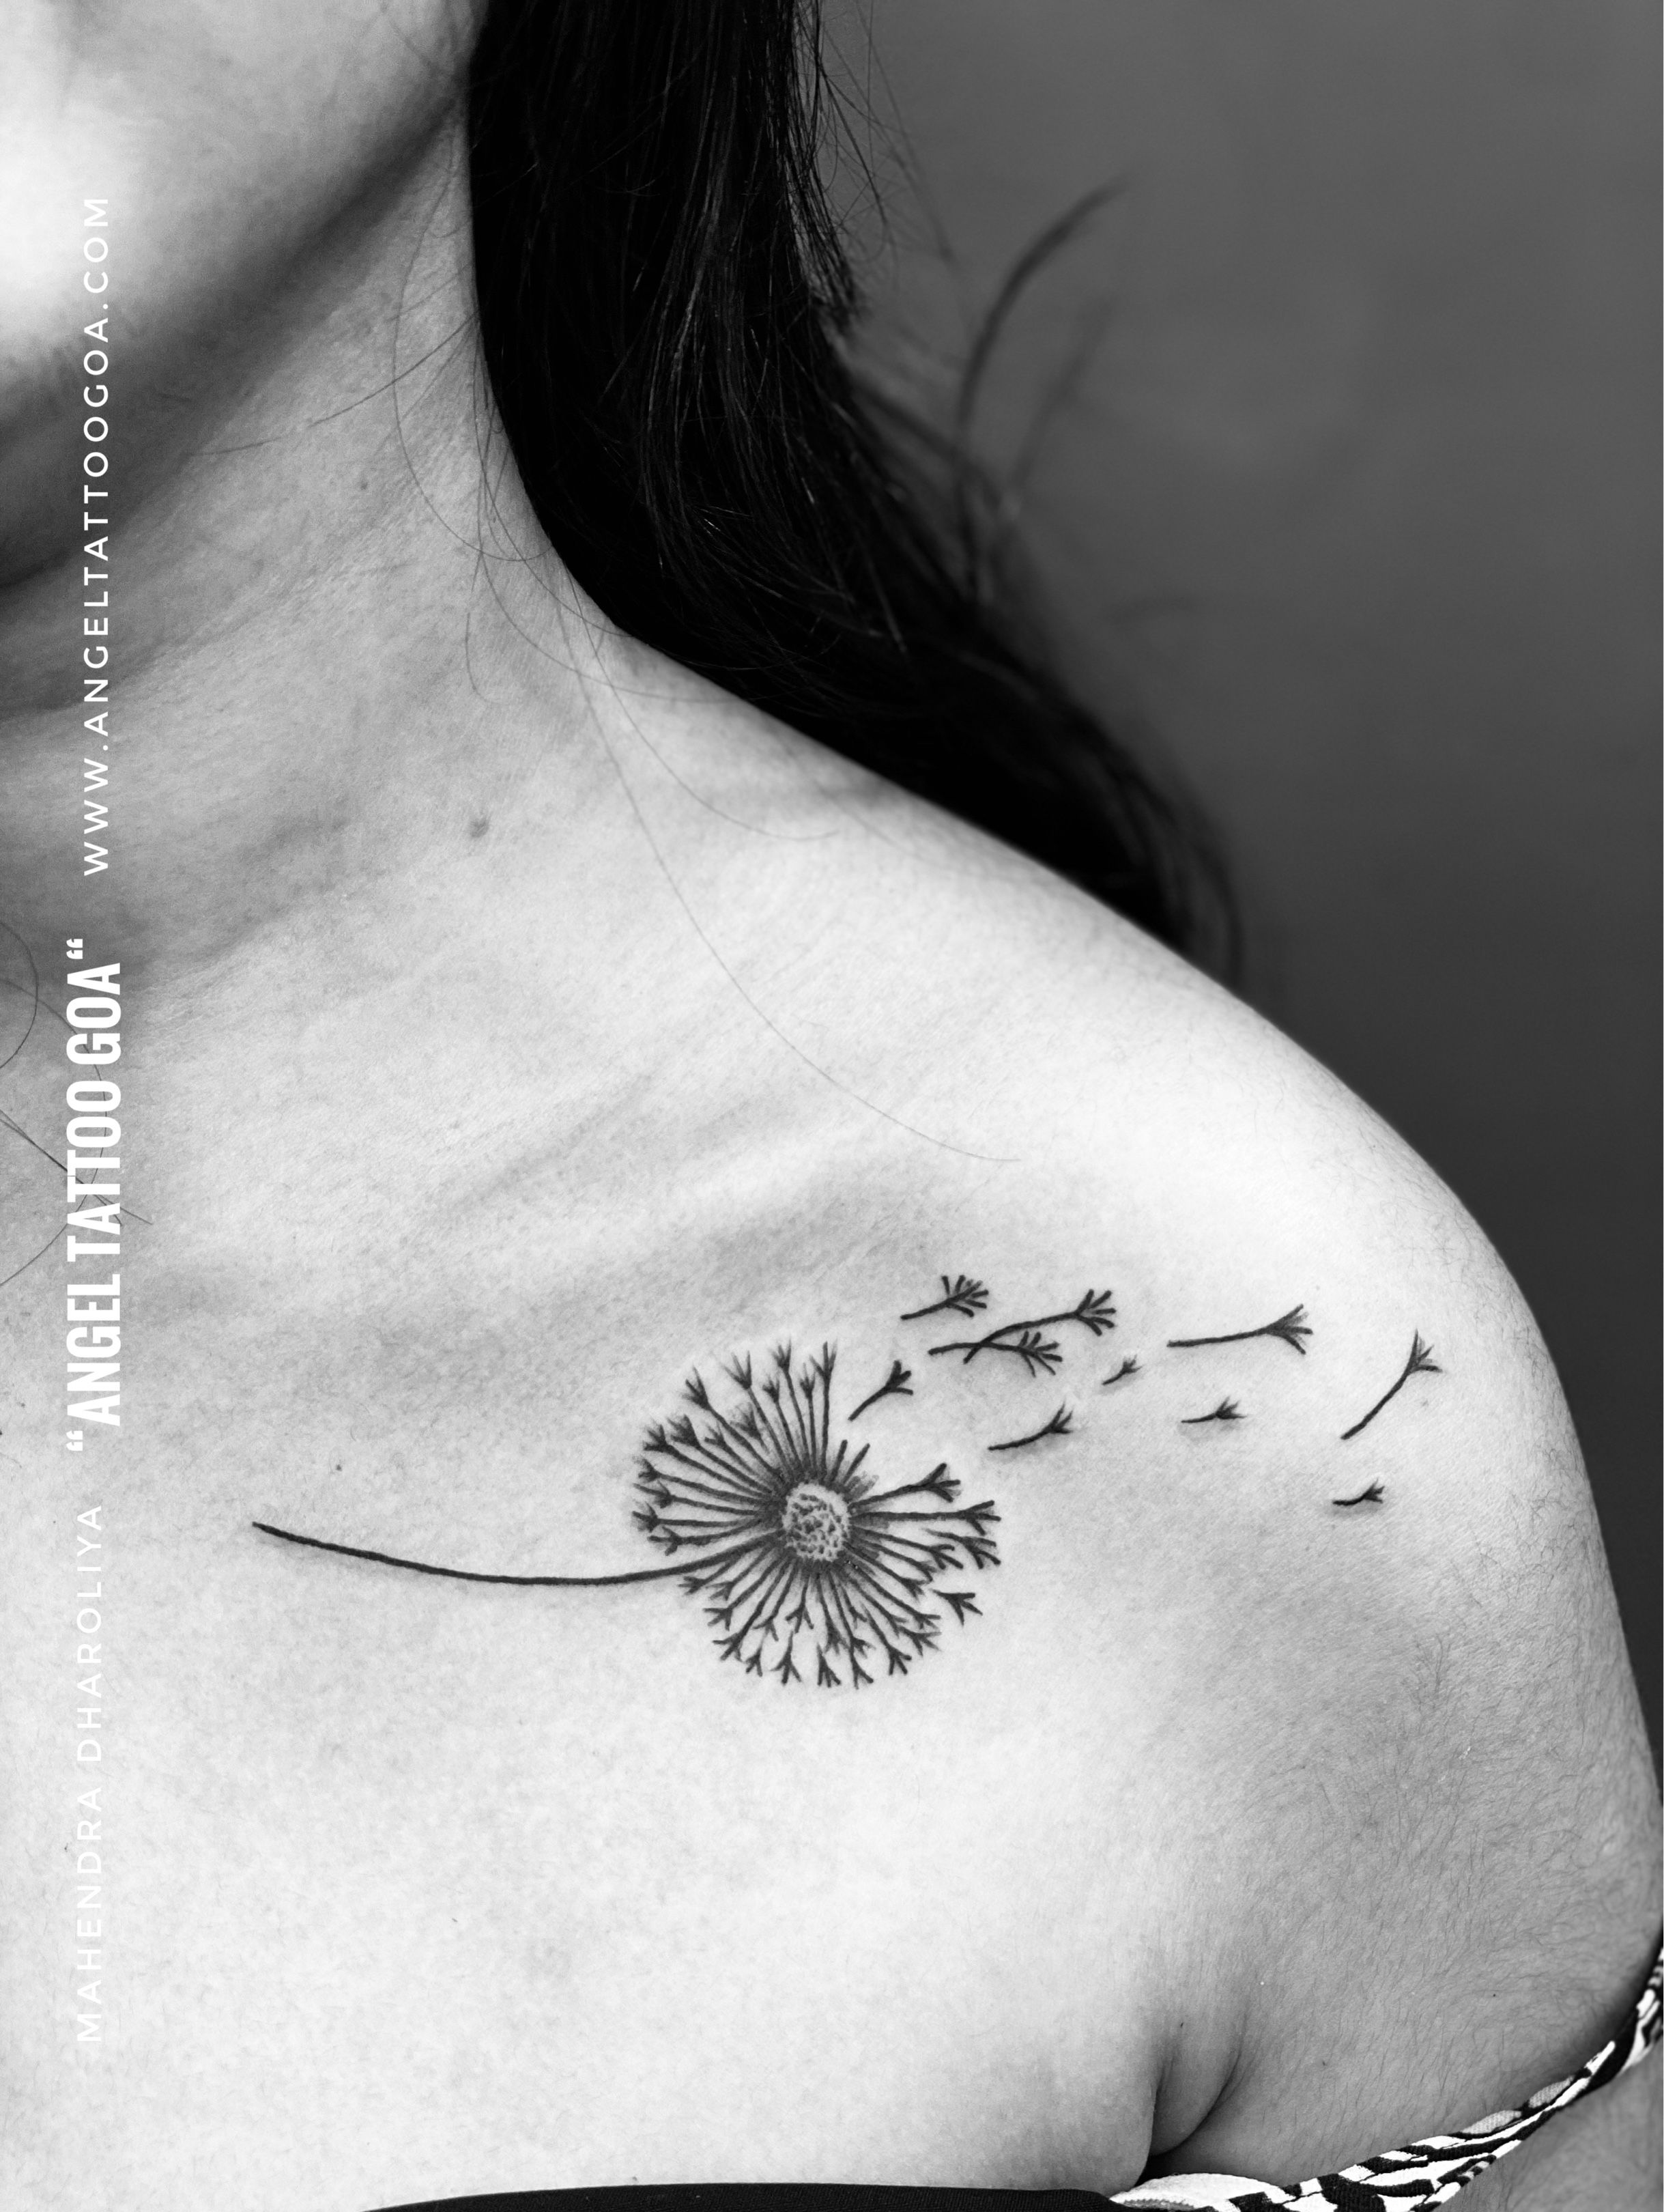 Butterflies and Dandelion tattoo. | Butterflies and Dandelion tattooed over  remnants of an older tattoo. | By Riaan Beukes TattoosFacebook